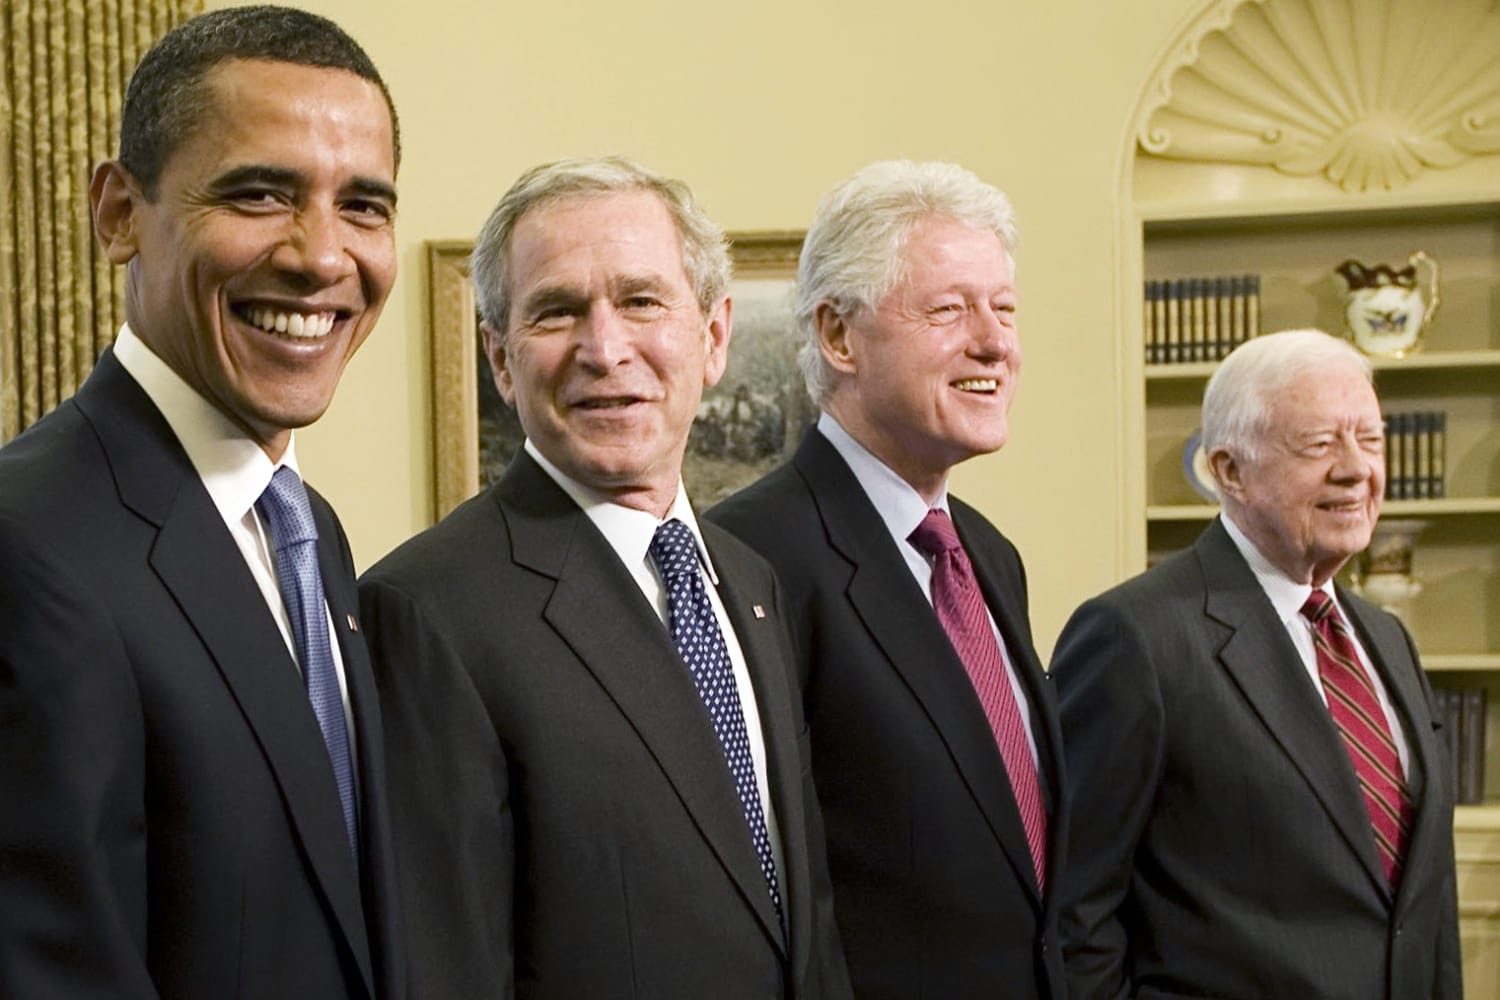 National Archives asks former presidents and vice presidents to check for classified documents